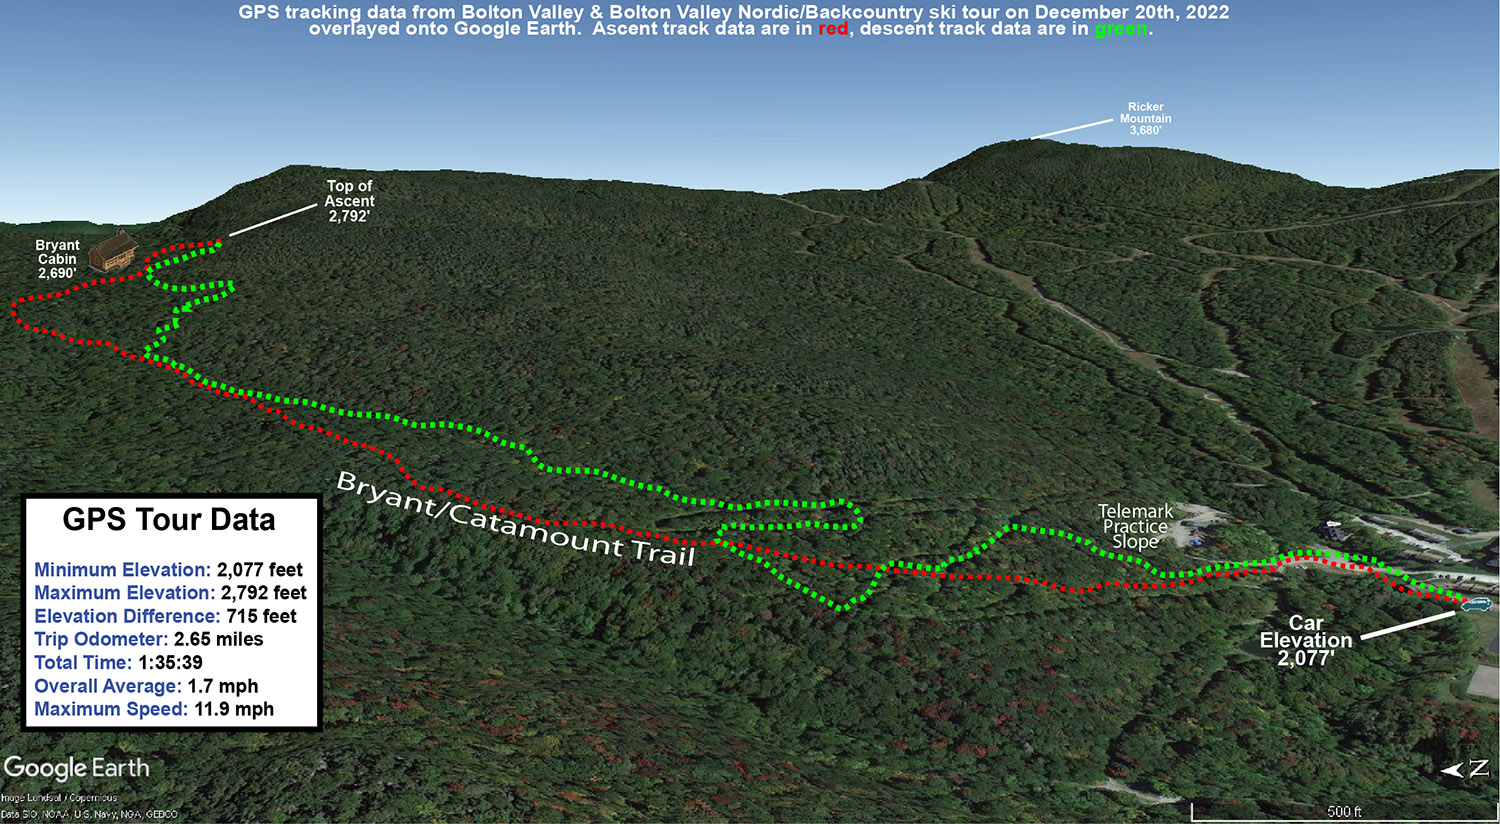 A Google Earth map with GPS tracking data from a ski tour on December 20th, 2022 on the Nordic and Backcountry Network at Bolton Valley Resort in Vermont